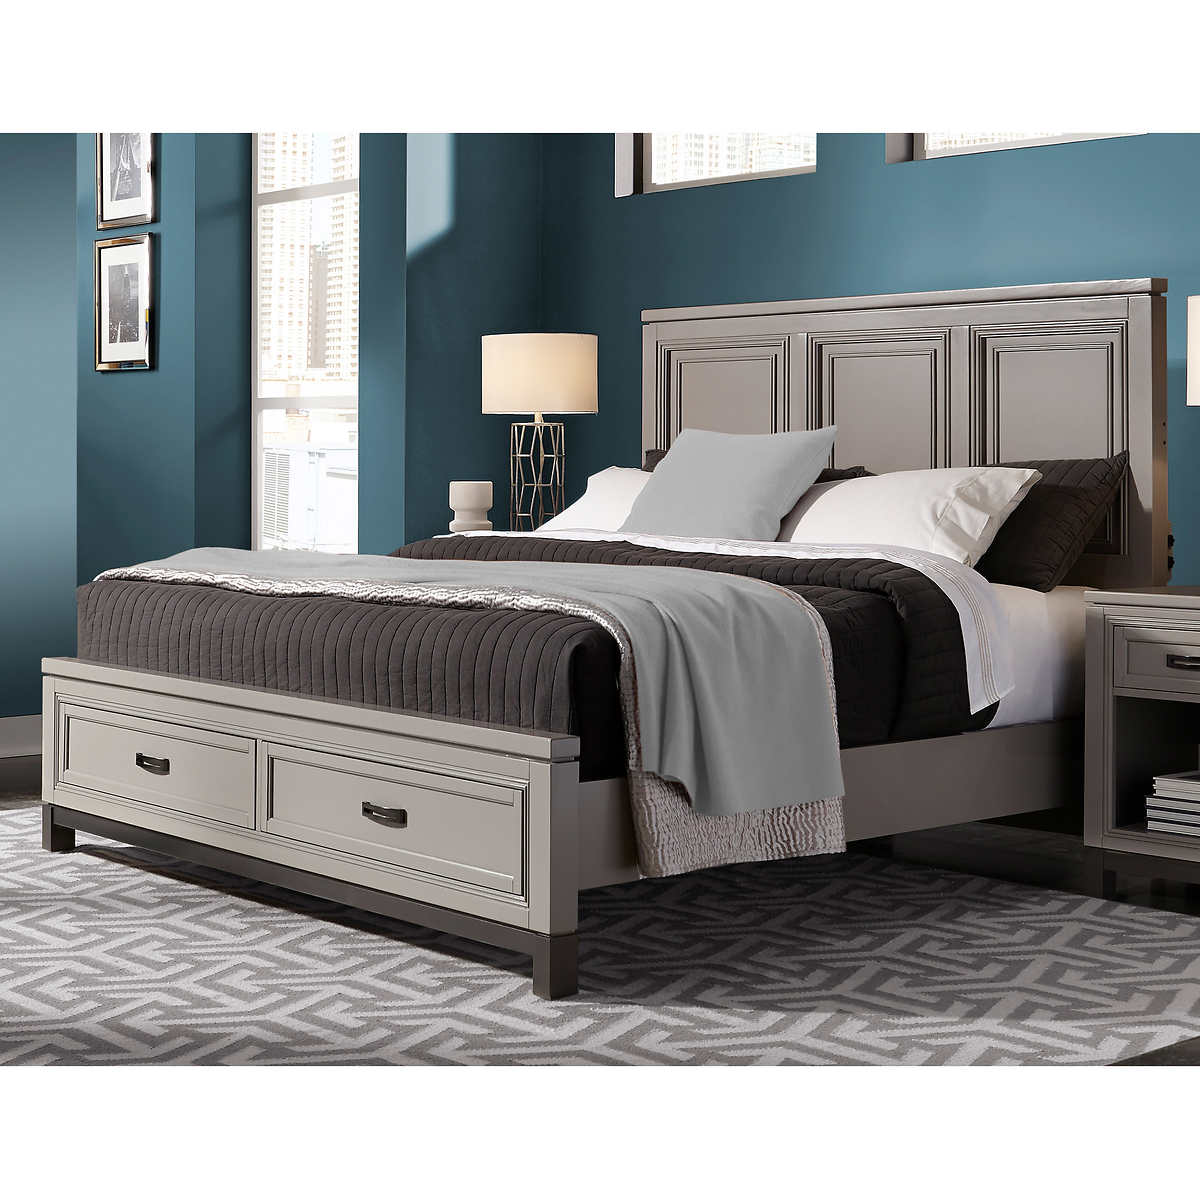 Norah King Storage Bed Costco, Bed Frame King With Drawers